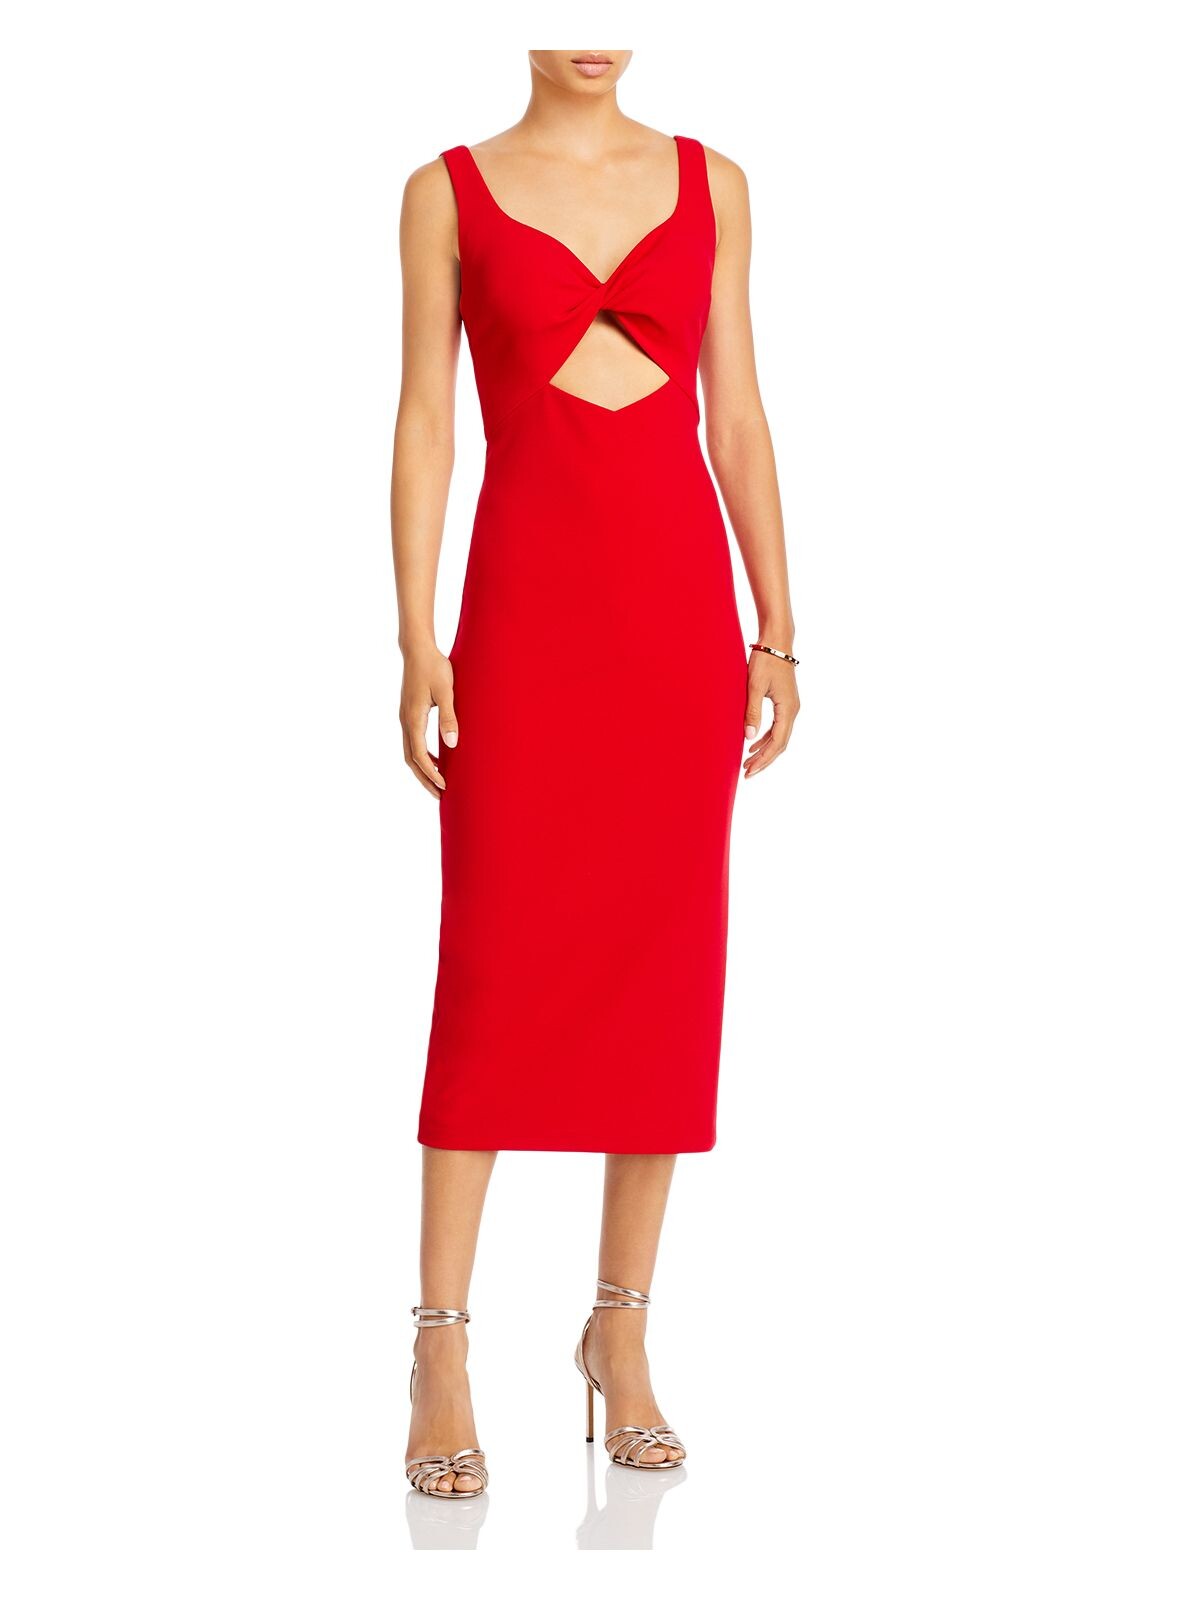 AQUA FORMAL Womens Red Stretch Twist Front Cut Out Zippered Back Slit Lined Sleeveless Sweetheart Neckline Midi Cocktail Sheath Dress 8